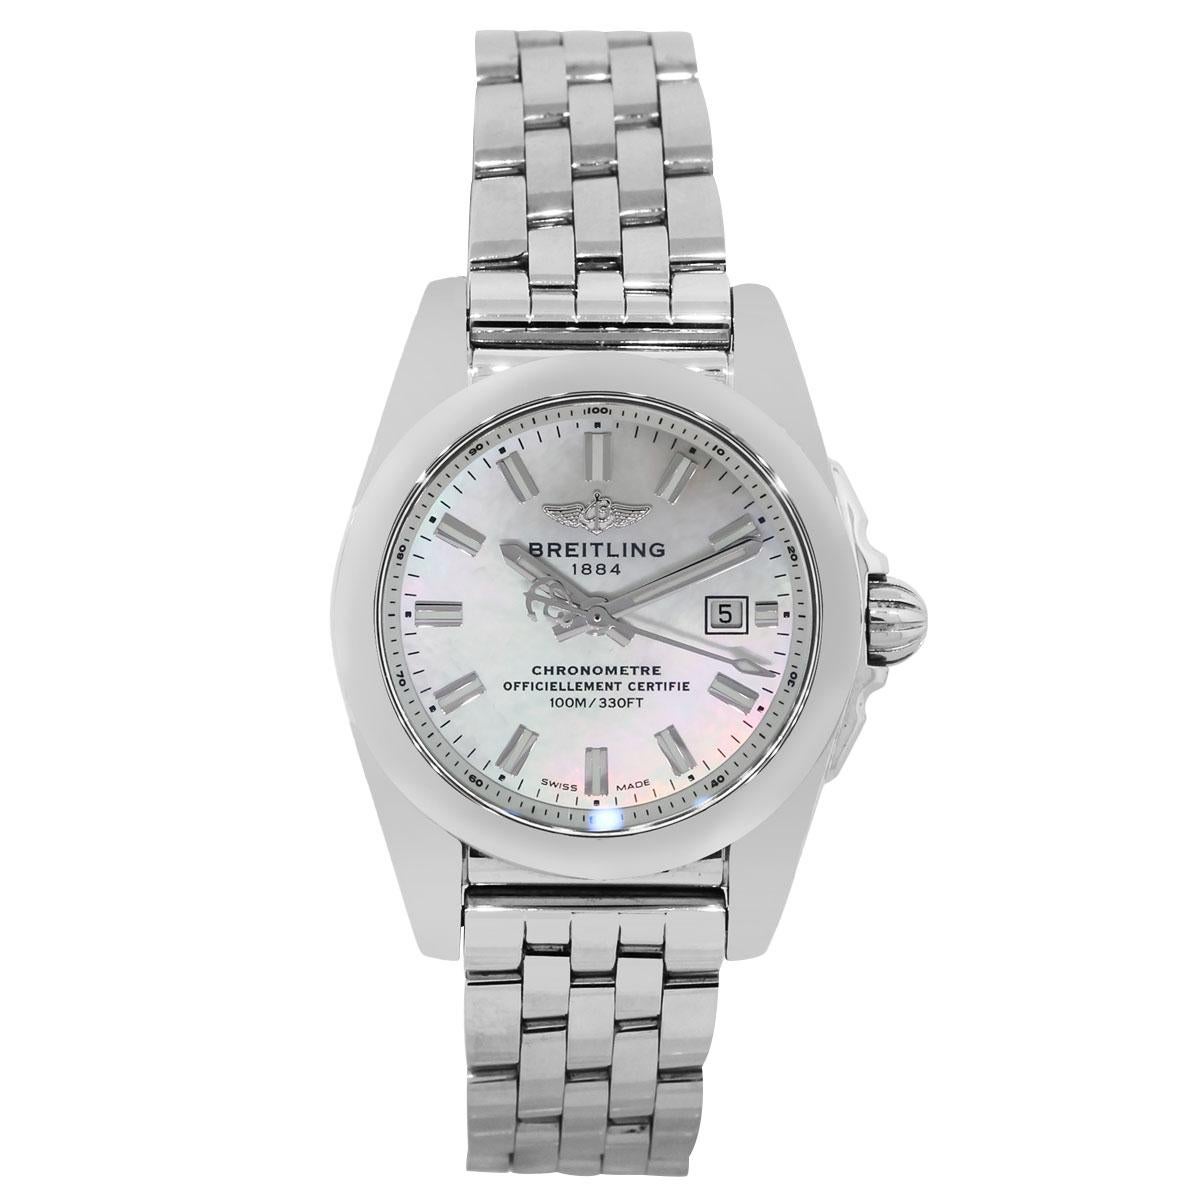 Brand: Breitling
MPN: W72348
Model: Galactic
Case Material: Stainless steel
Case Diameter: 29mm
Crystal: Sapphire crystal
Bezel: Smooth stainless steel fixed bezel
Dial: Mother of Pearl dial with silver luminescent hour makers and hands. Date is